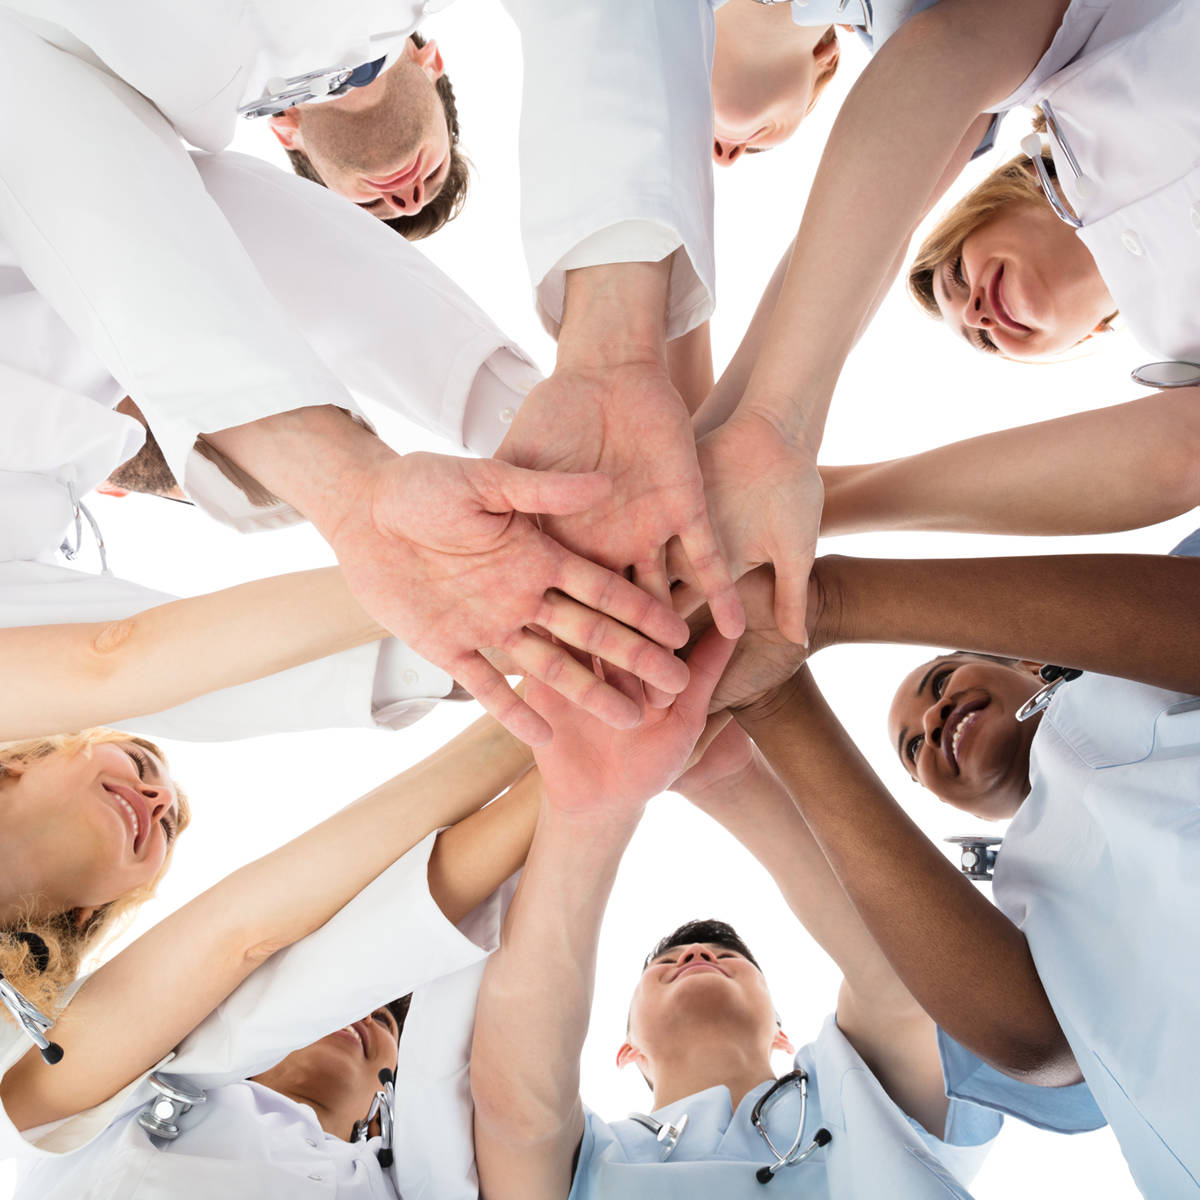 Nurses in circle putting hands together